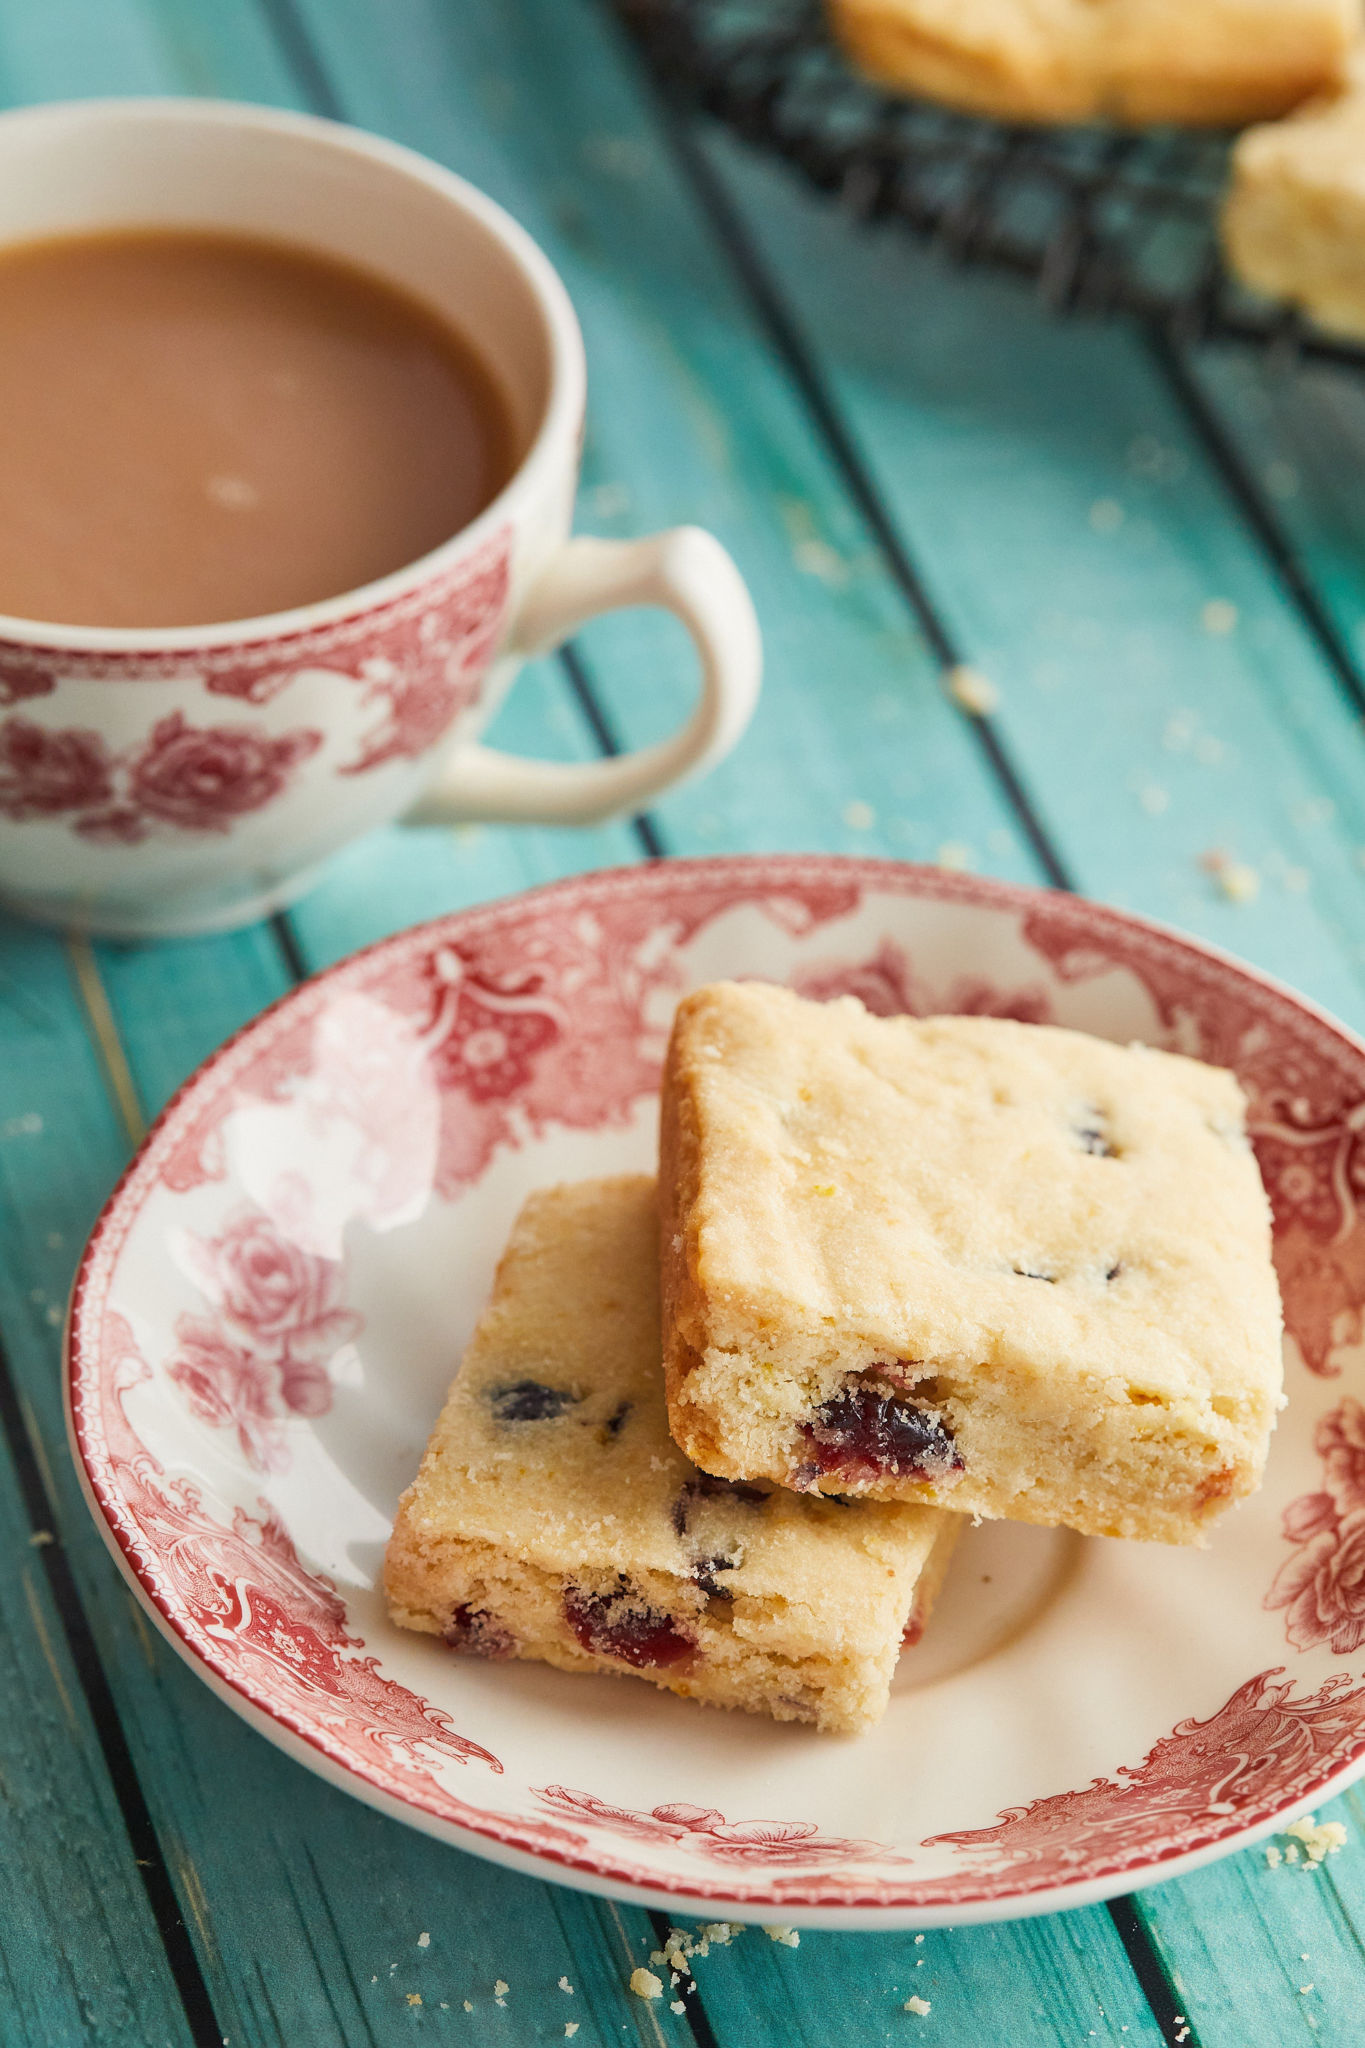 A plate with two servings of cranberry orange shortbread, next to a cup of tea.